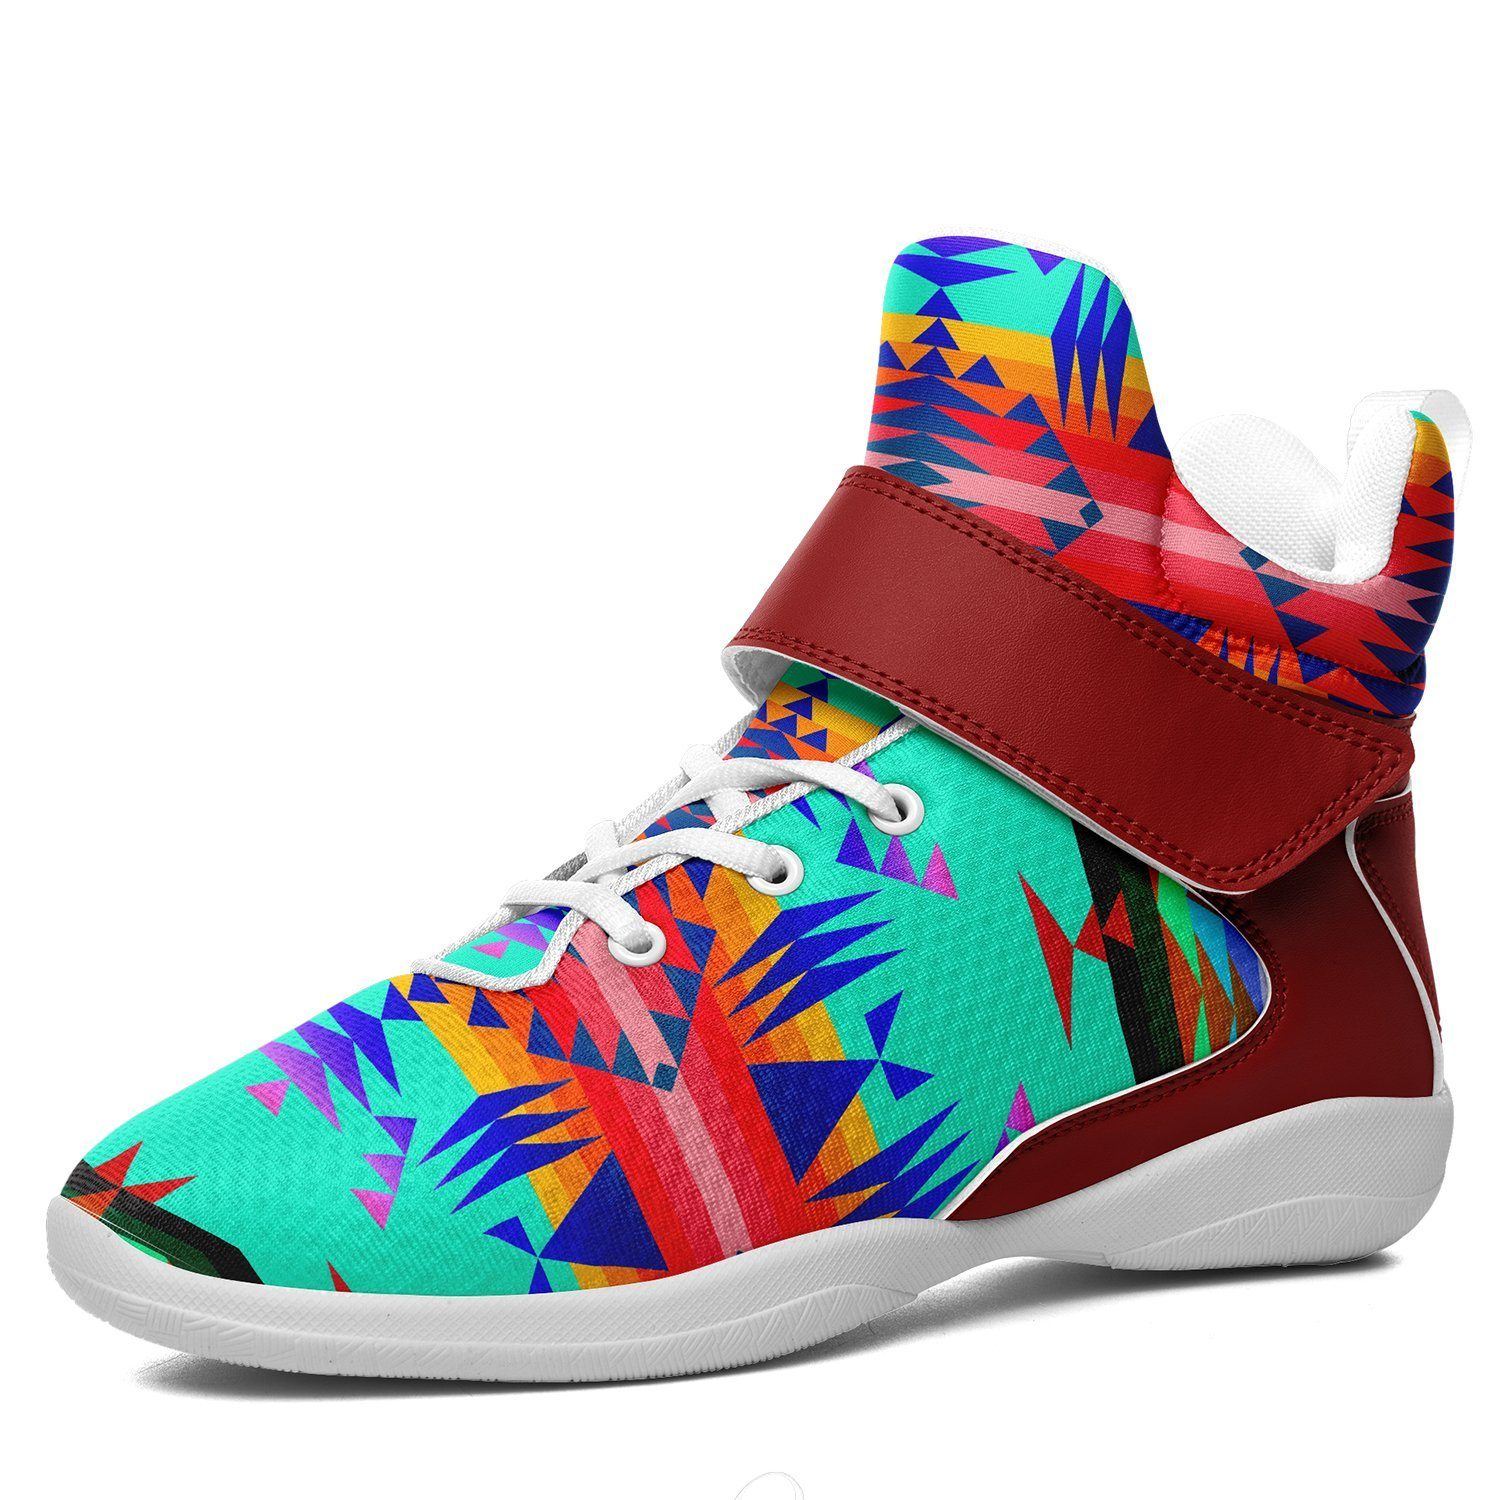 Between the Mountains Spring Ipottaa Basketball / Sport High Top Shoes - White Sole 49 Dzine US Men 7 / EUR 40 White Sole with Dark Red Strap 